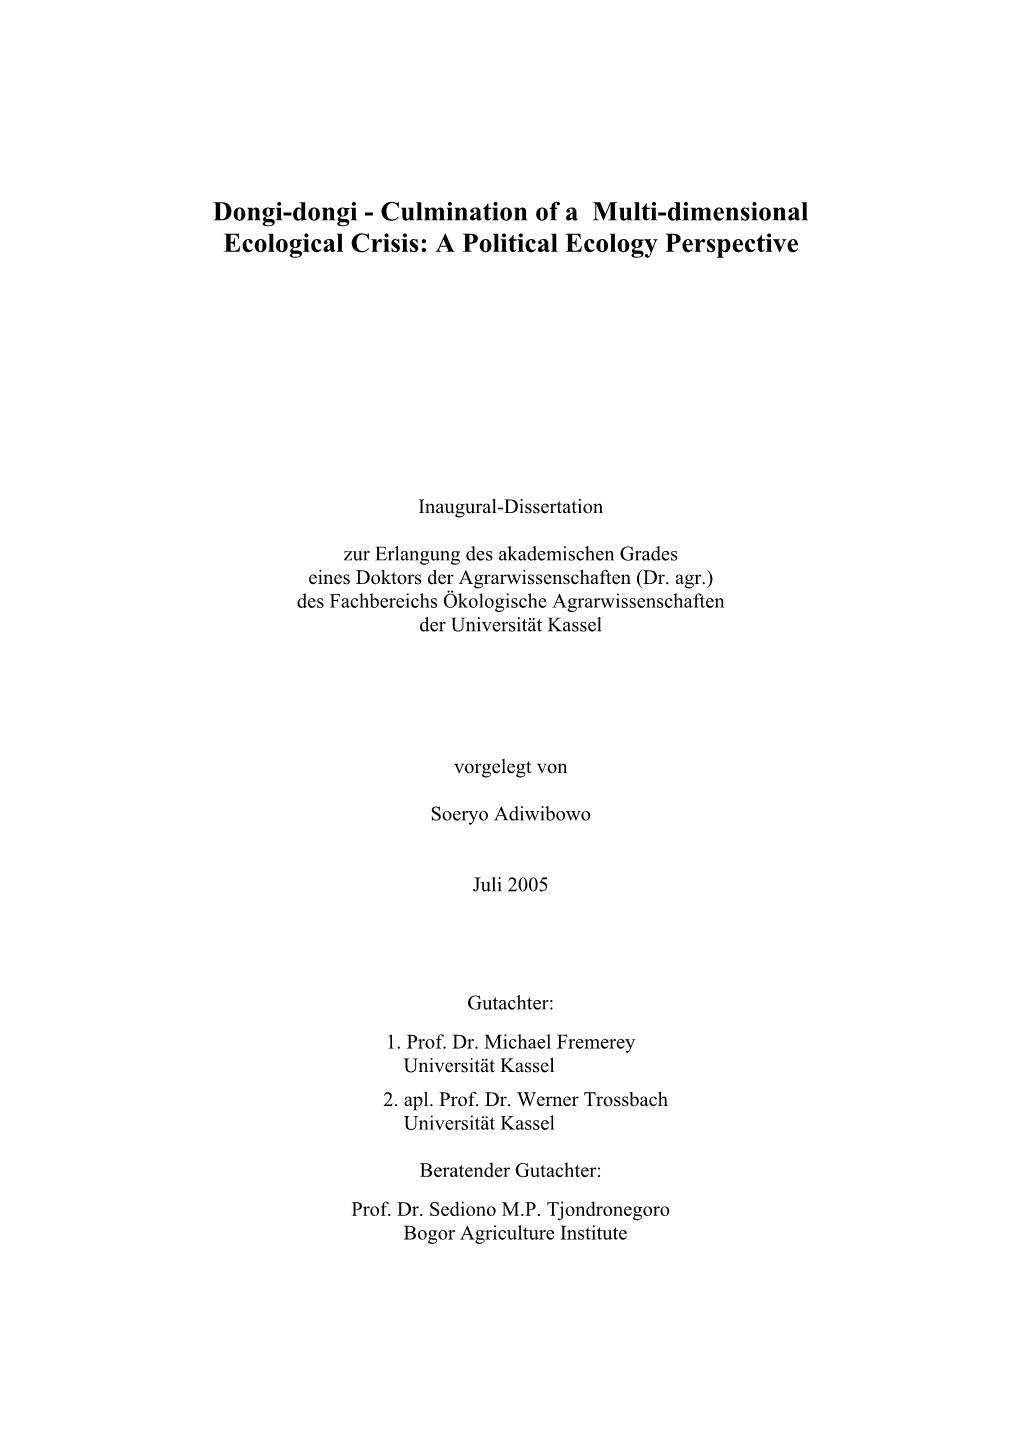 Dongi-Dongi - Culmination of a Multi-Dimensional Ecological Crisis: a Political Ecology Perspective